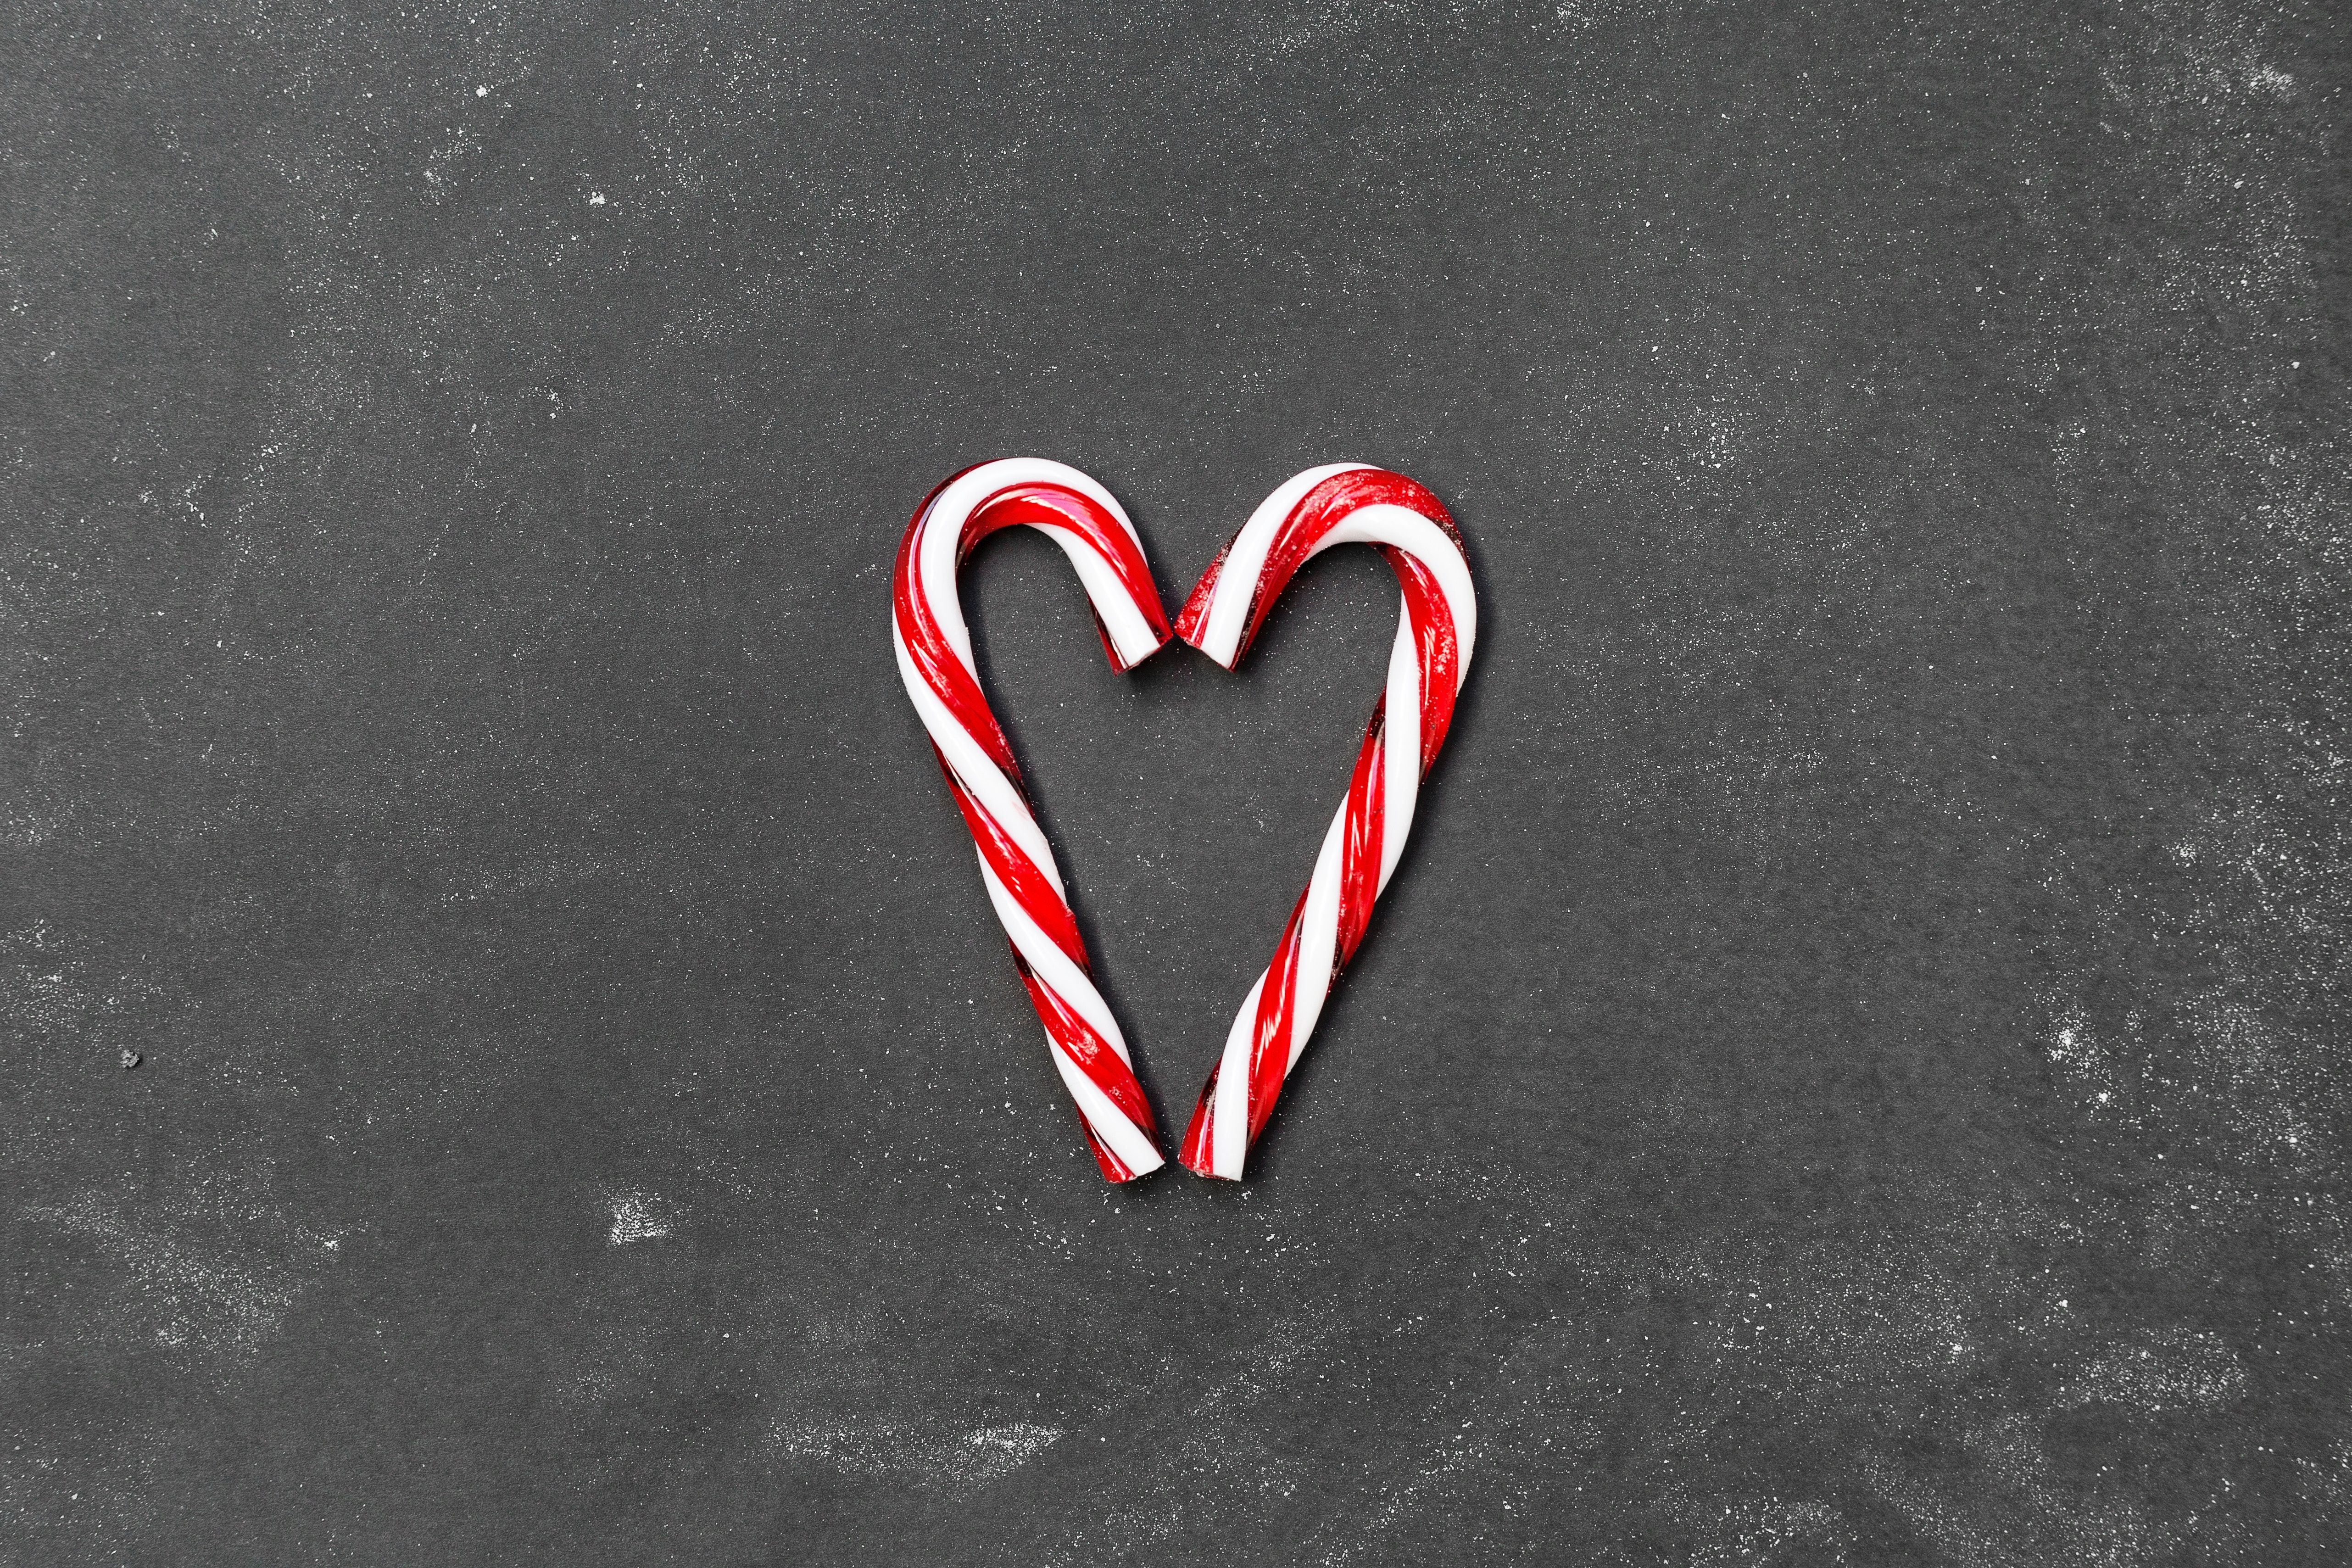 A candy cane shaped heart on top of chalkboard - Candy, candy cane